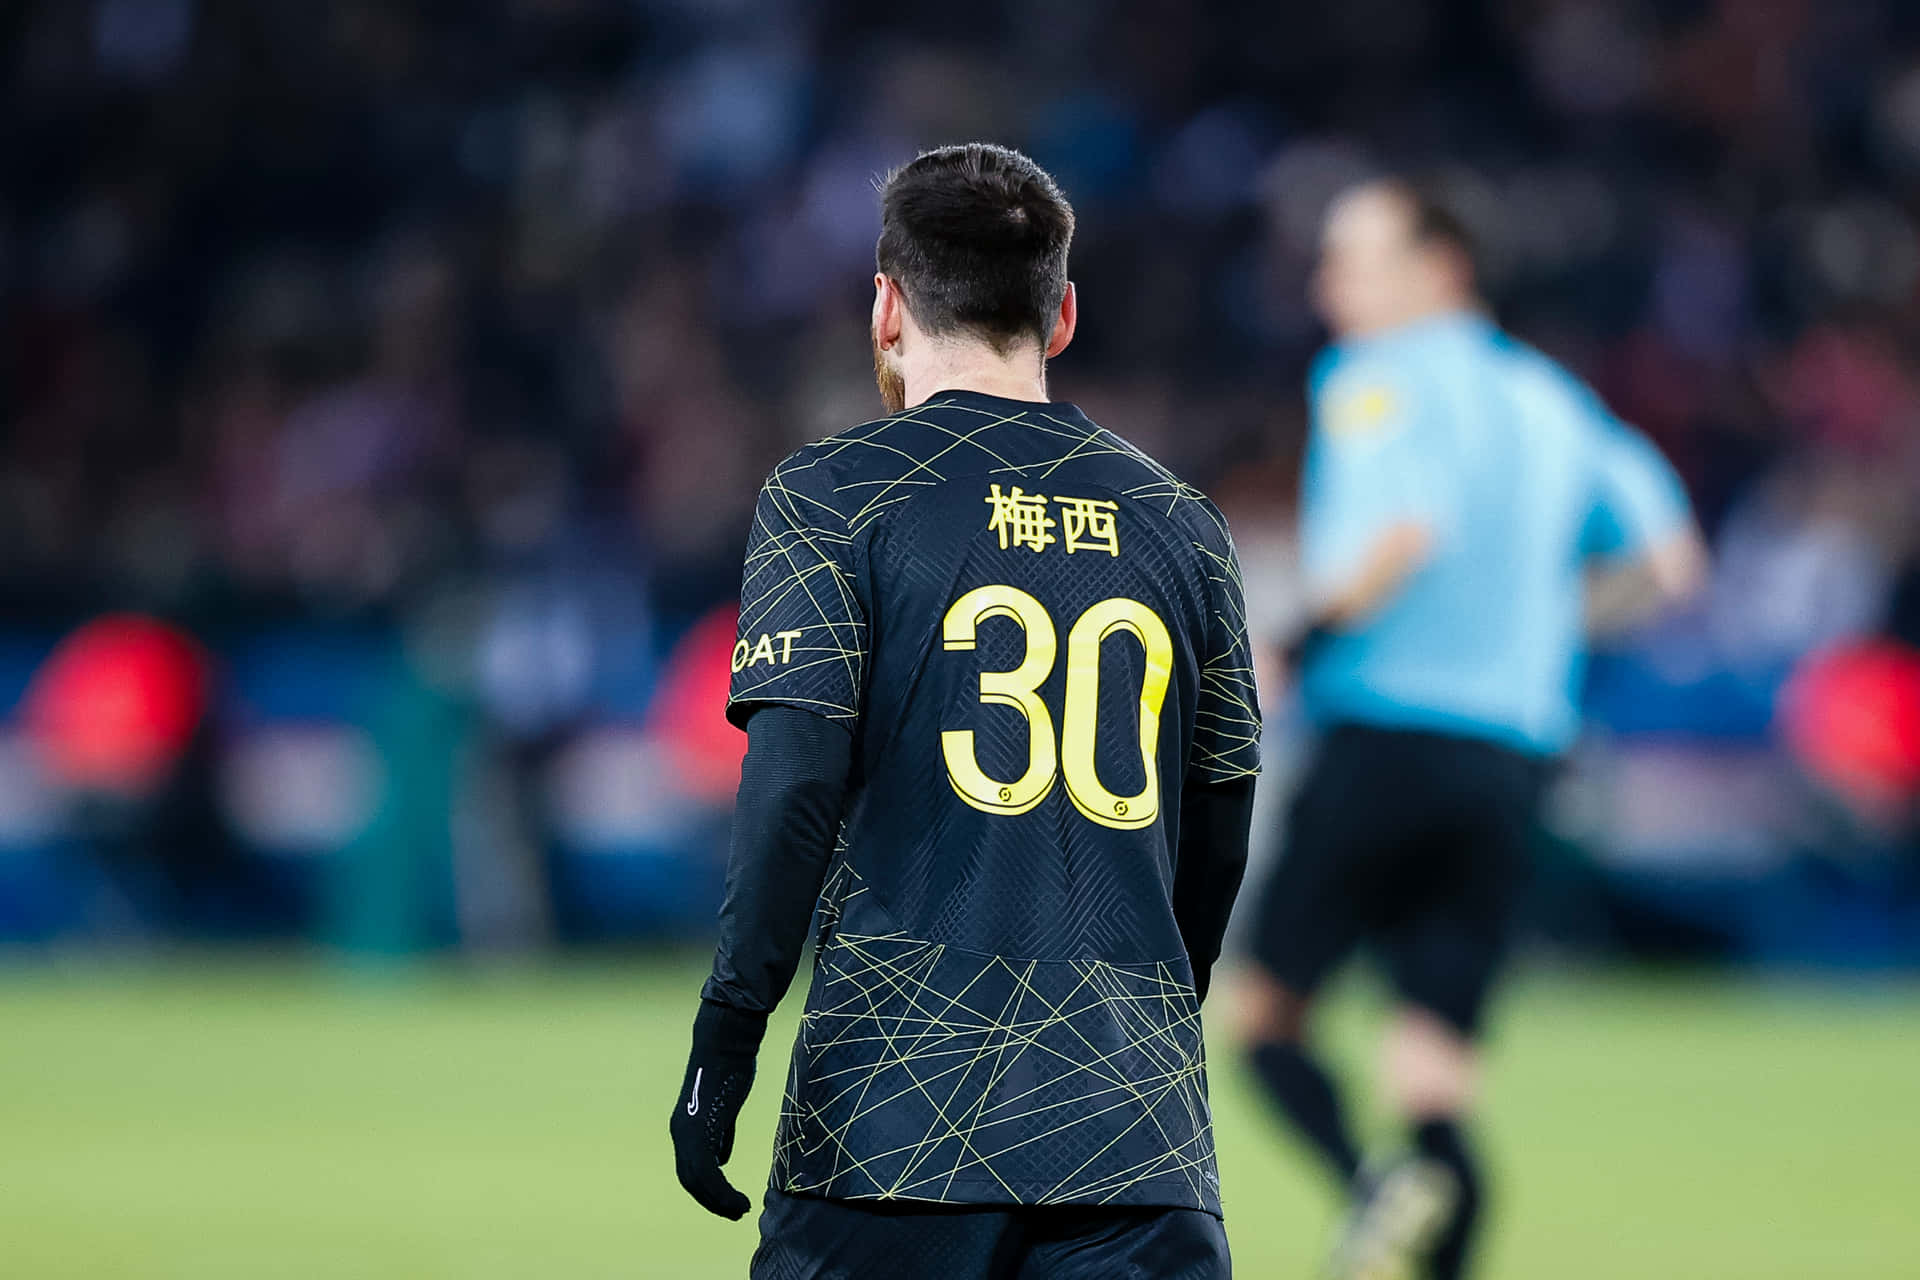 Messi Number30 Jersey Back View Wallpaper